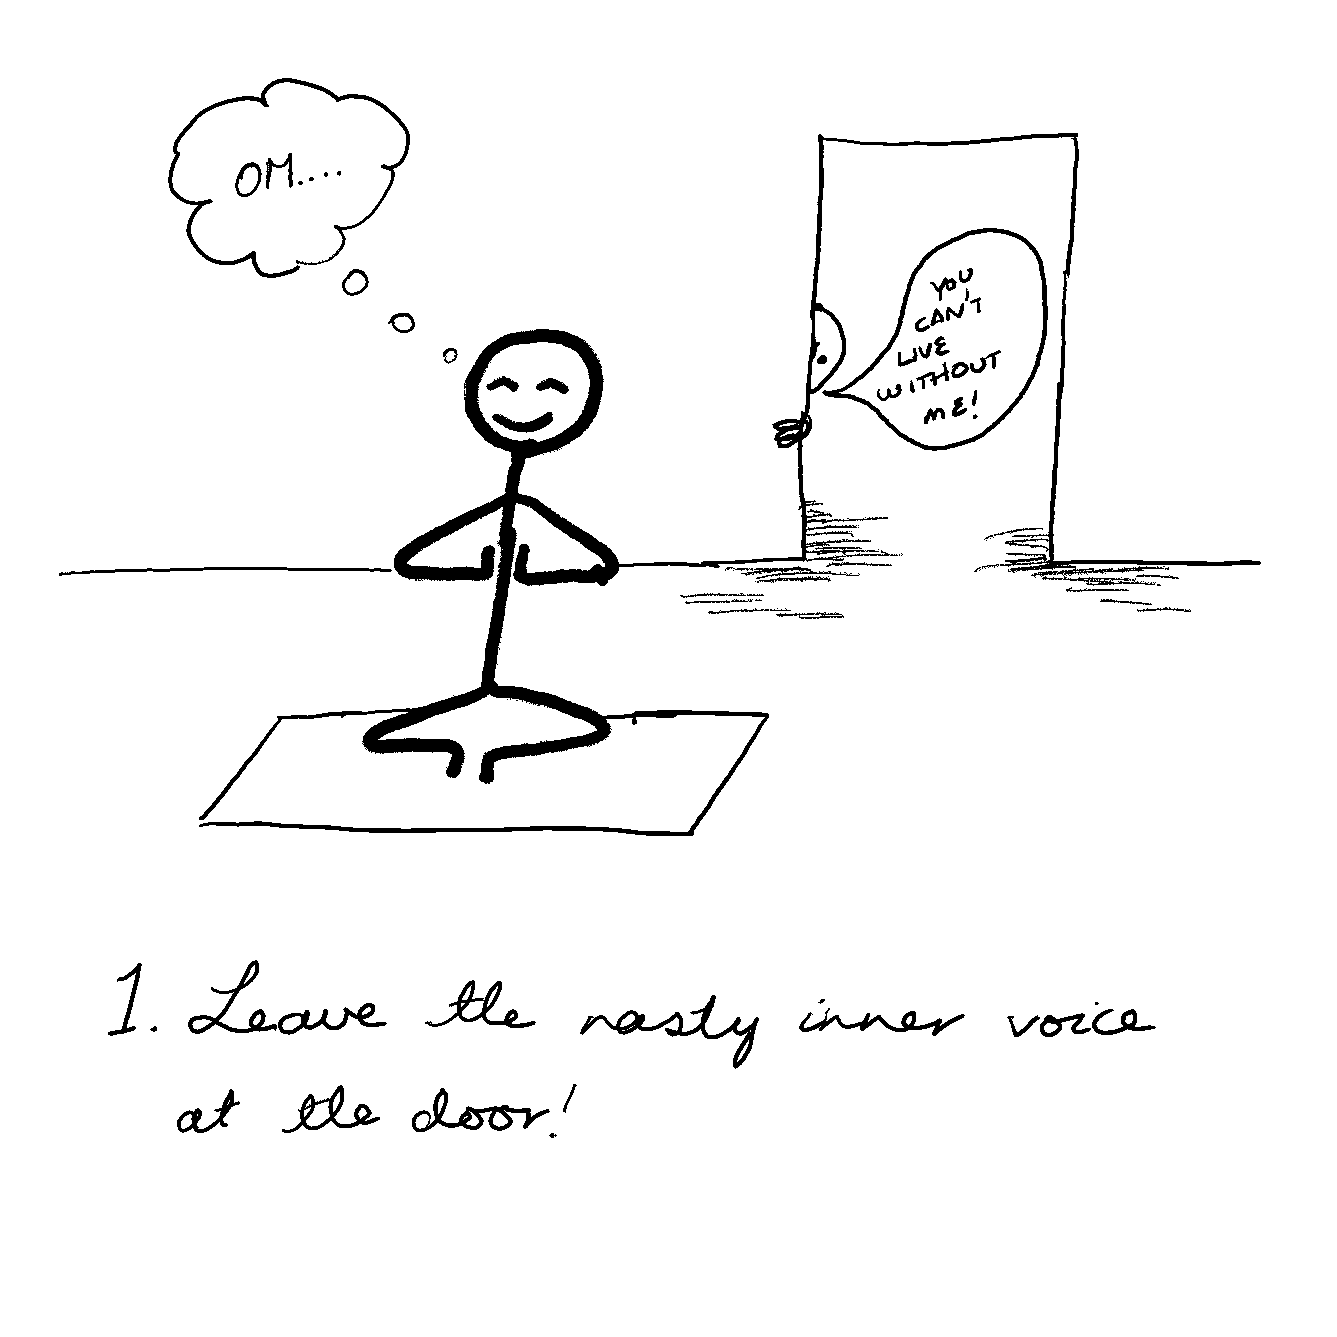 Yoga Class Room Rule 1: Leave the nasty inner voice at the door!